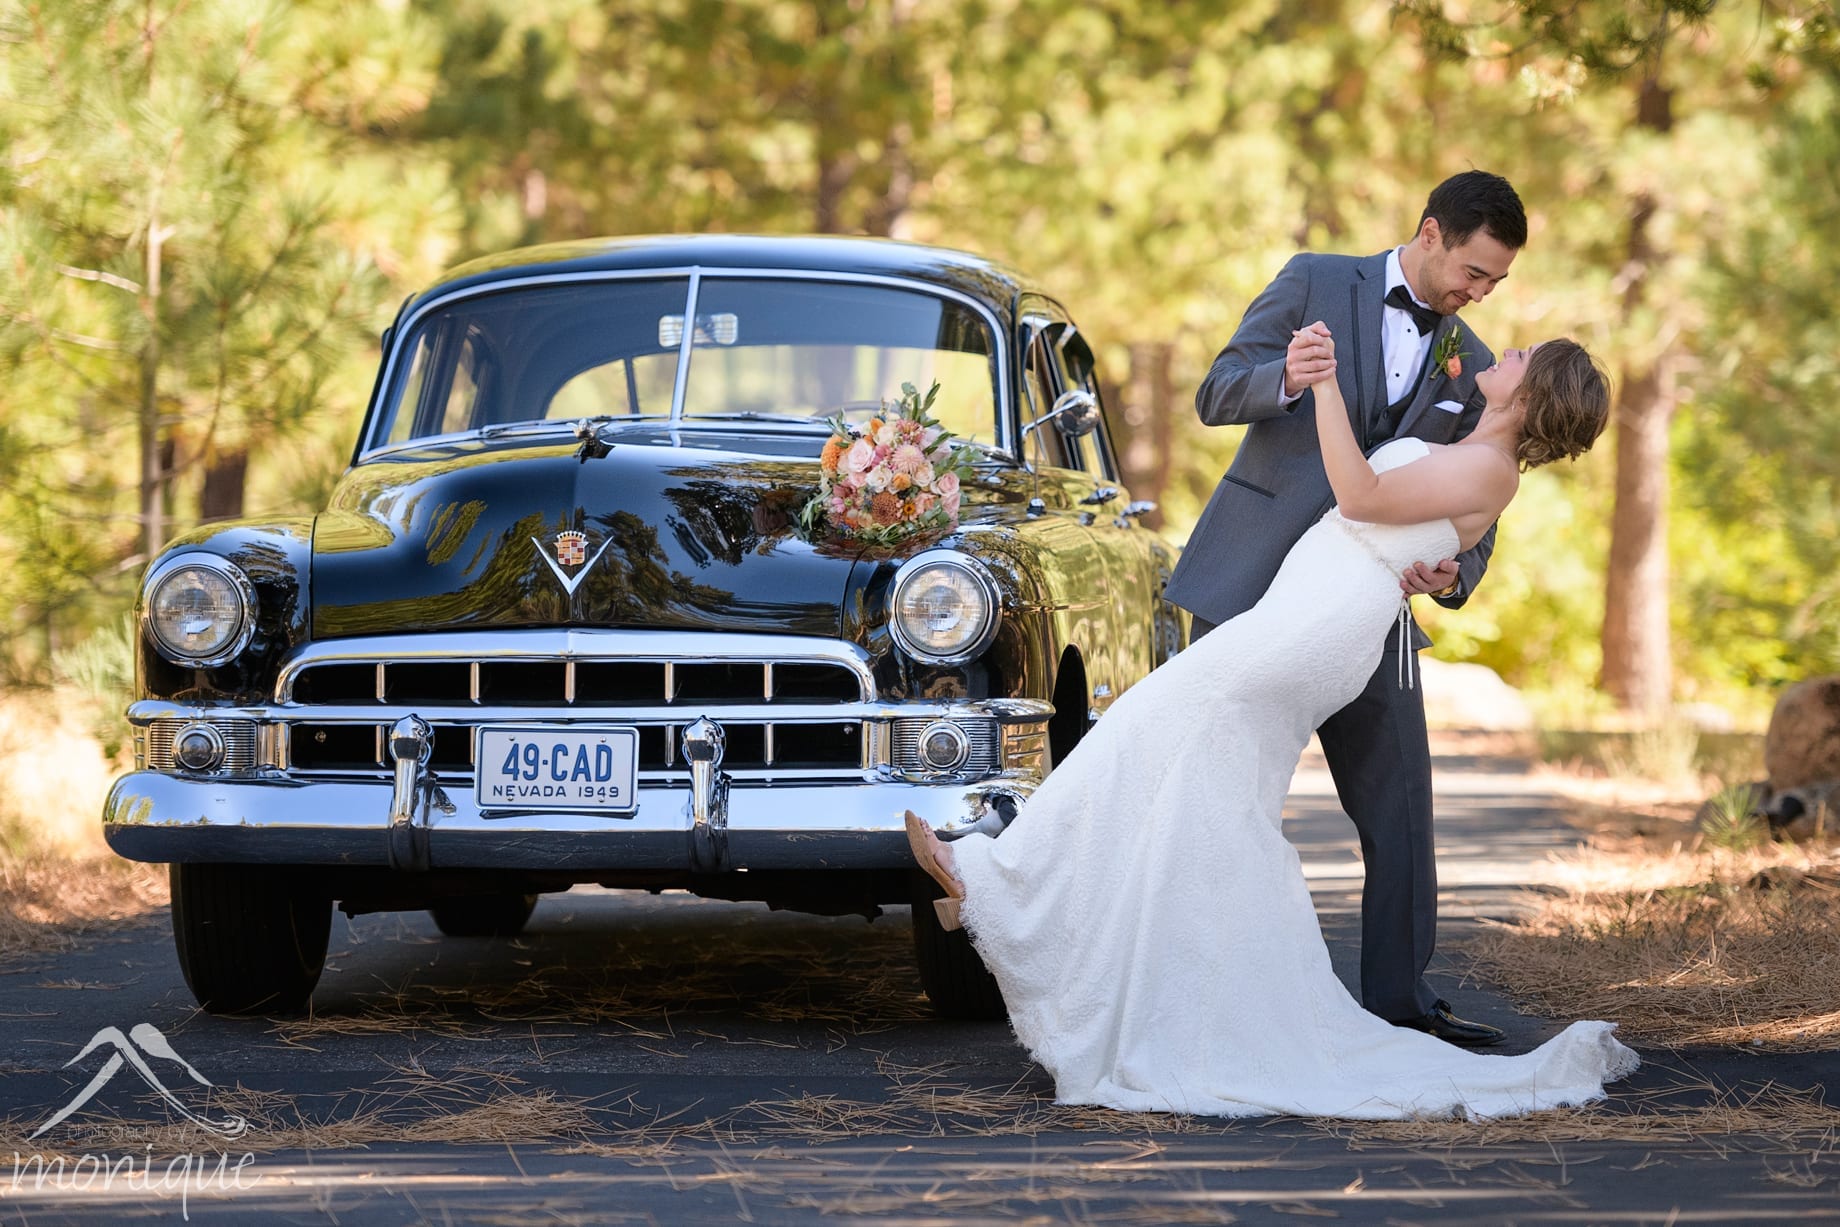 Truckee wedding photography at Lahontan Golf Club with a classic 1949 cadillac